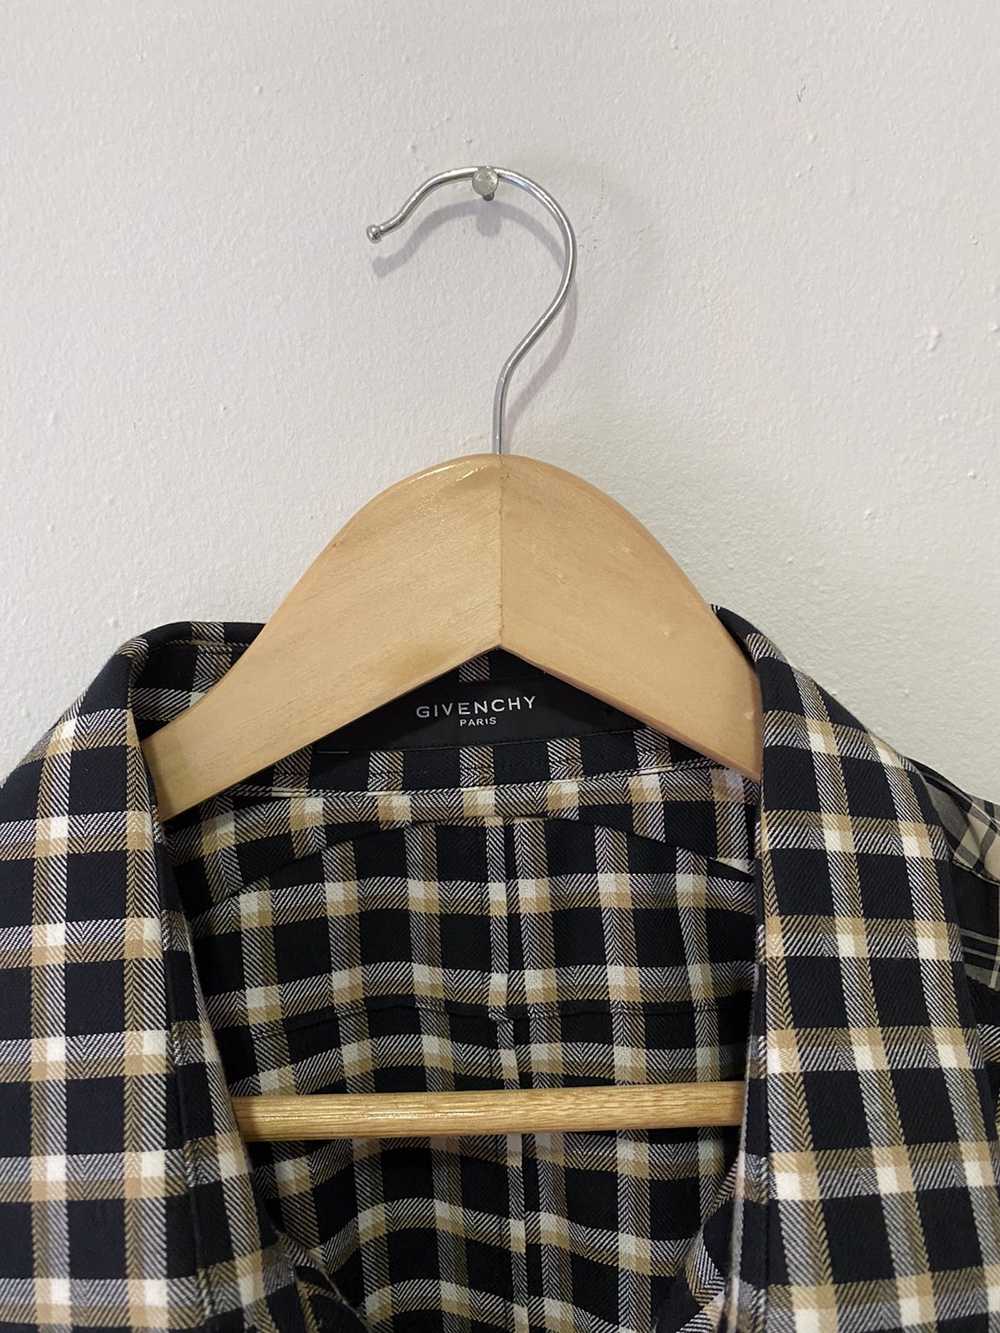 Givenchy Givenchy Multi Color Plaid Oxford Shirt - image 3